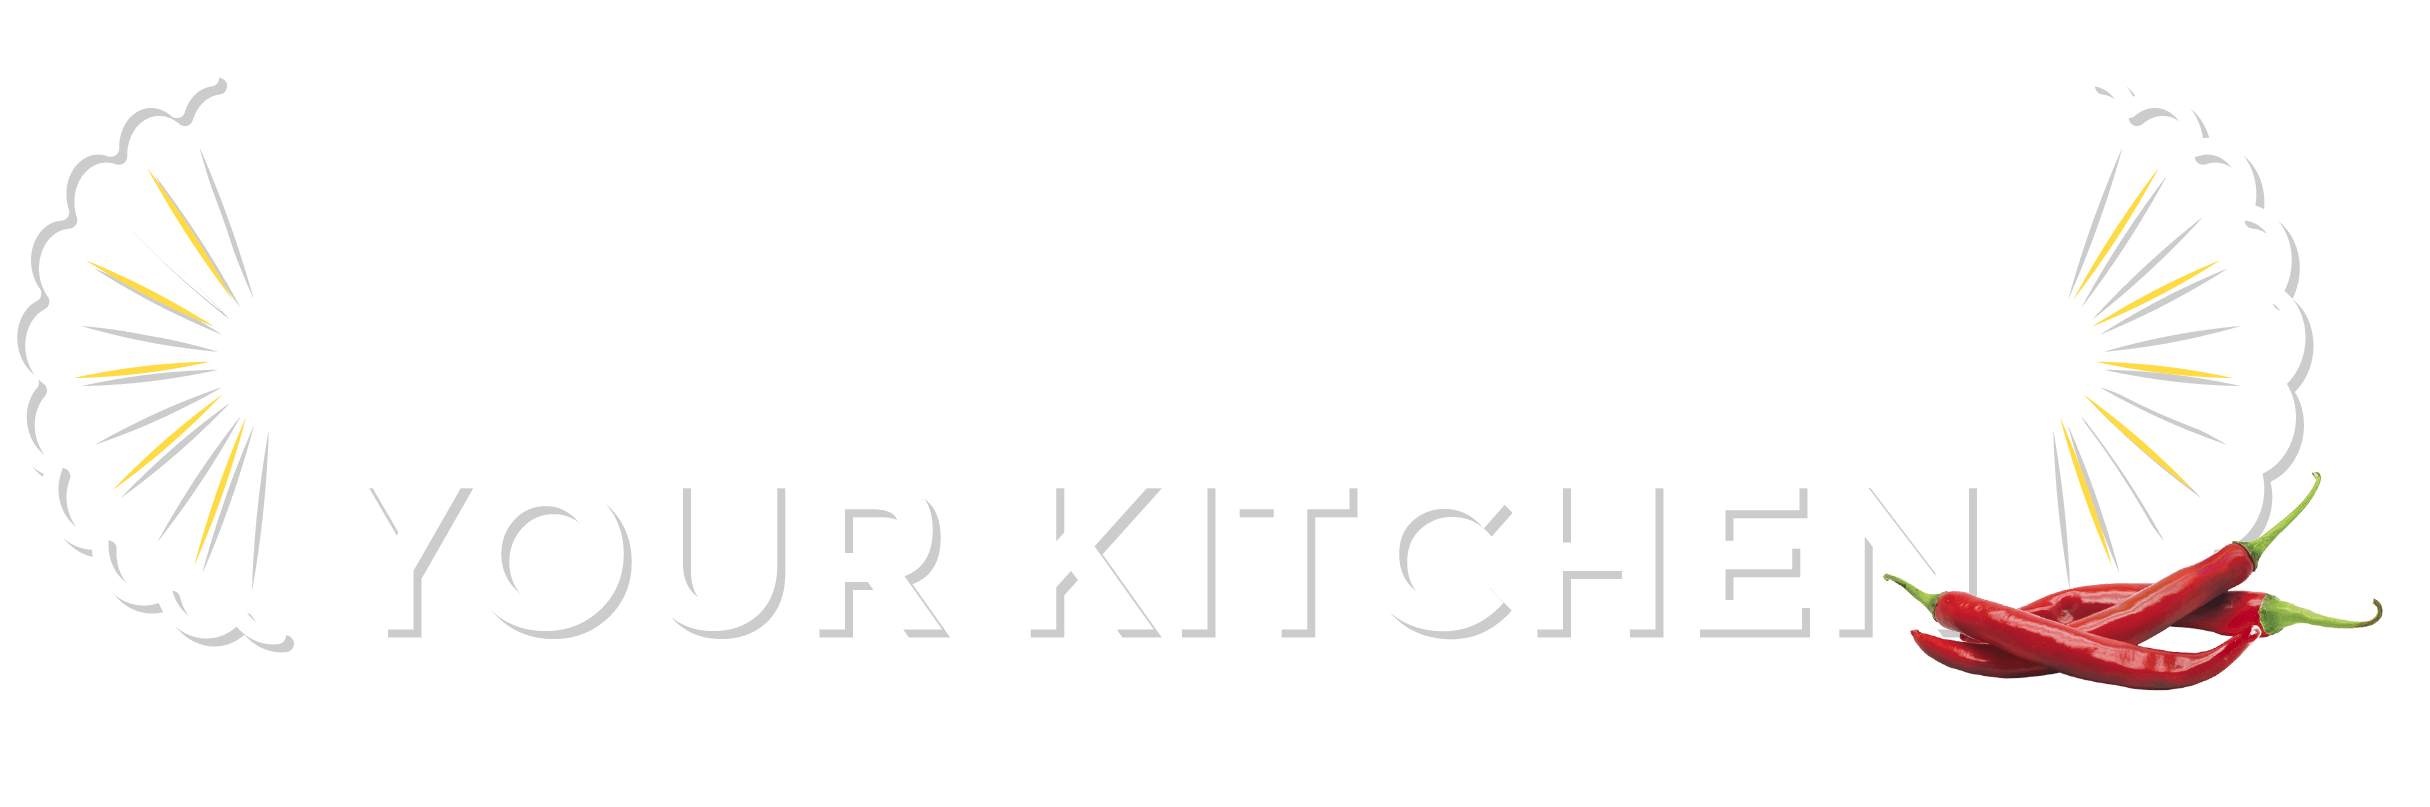 Mexico pride has arrived to your kitchen